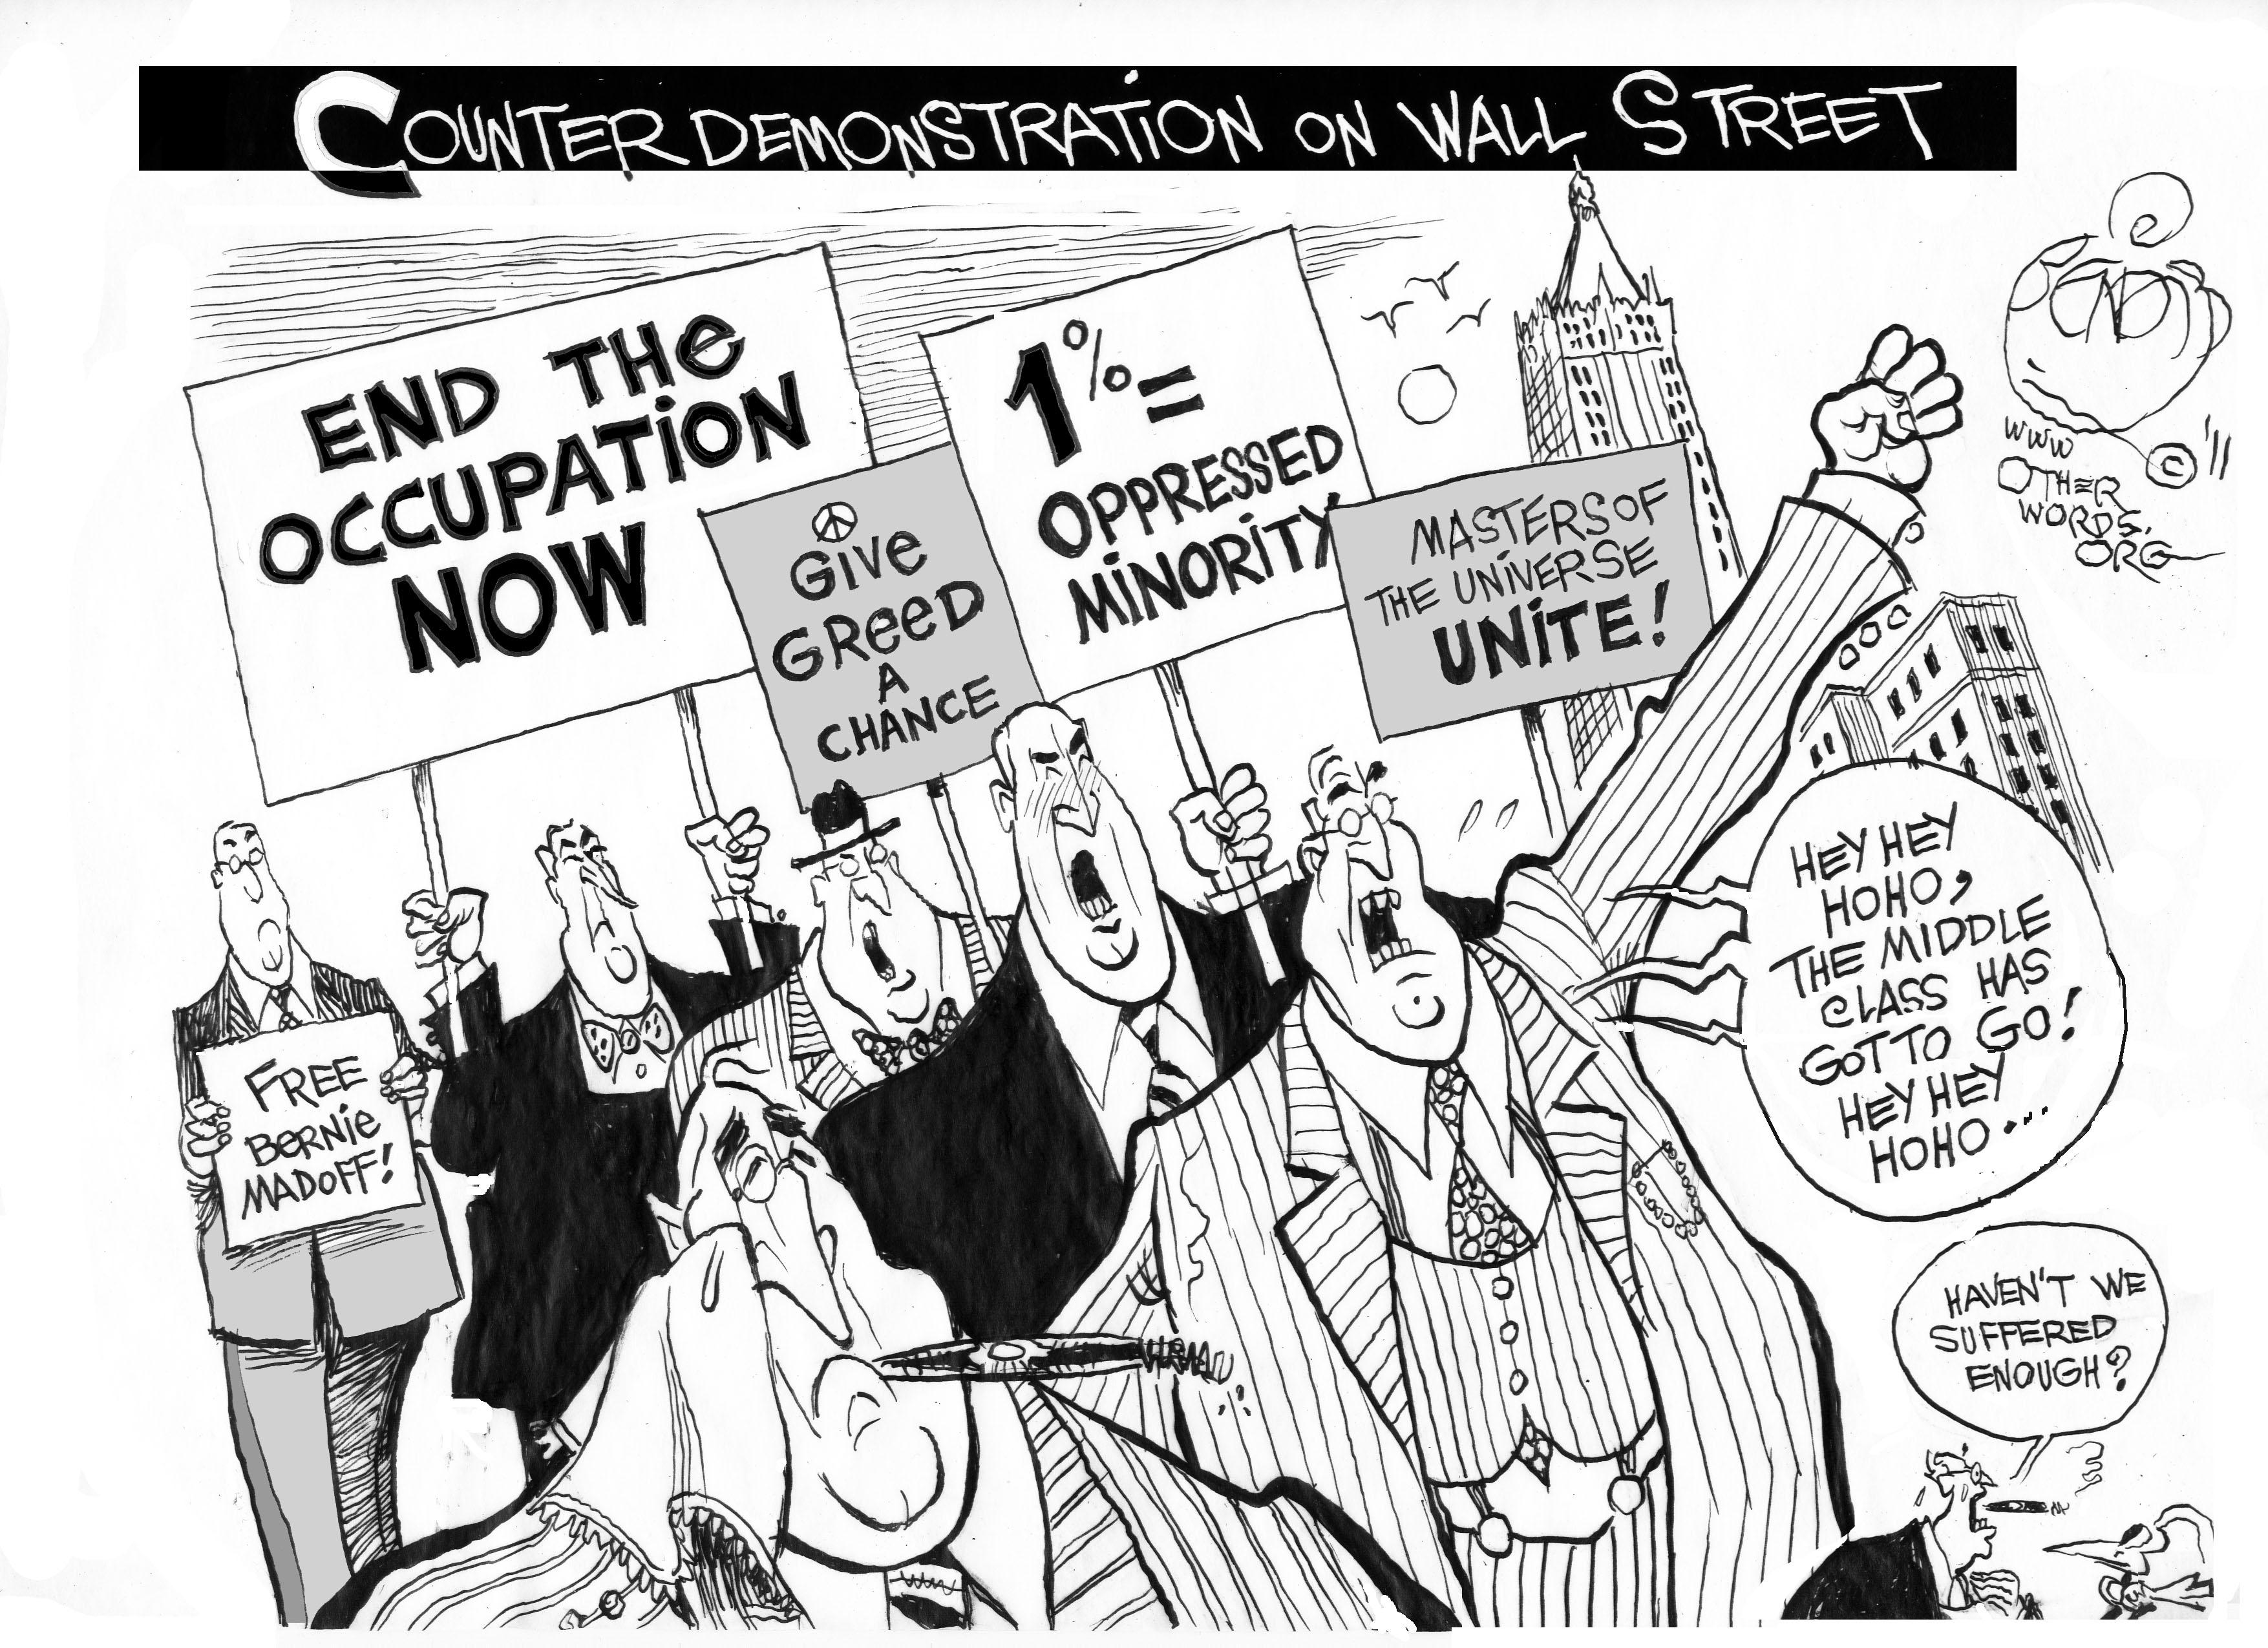 Dispatch from Occupy Wall Street